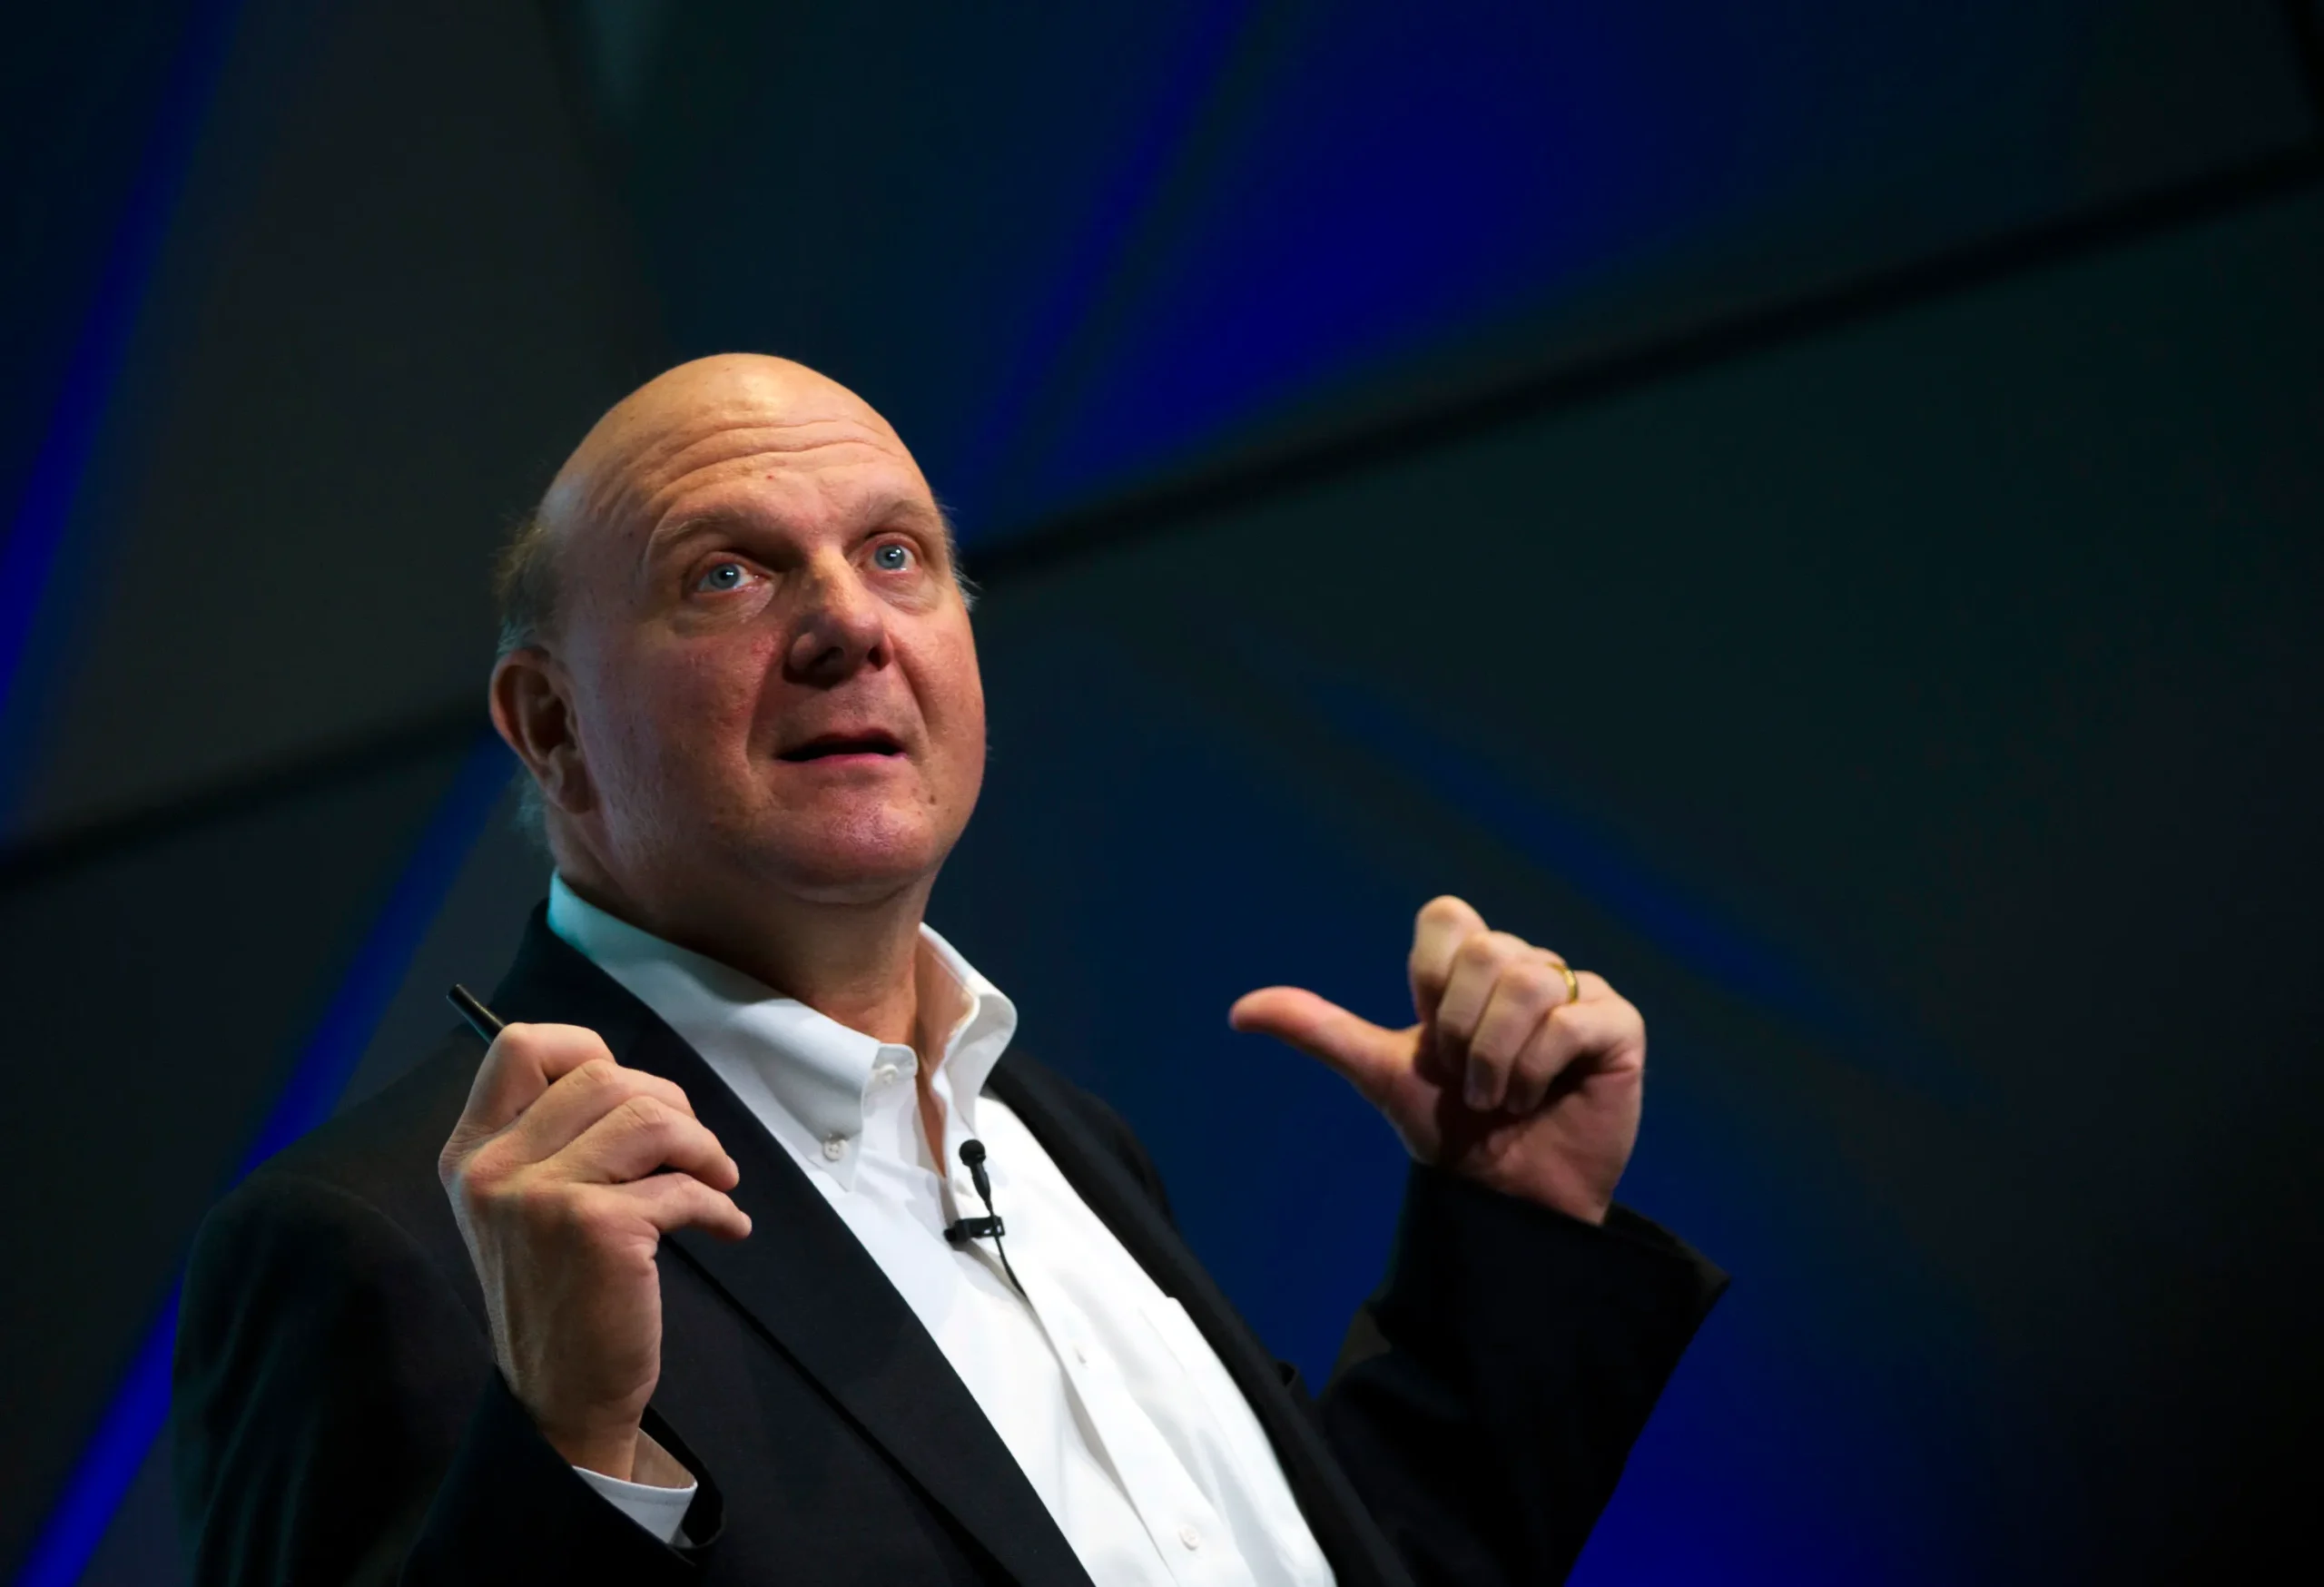 Steve Ballmer: From Bytes to Baskets - A Journey of Innovation and Impact